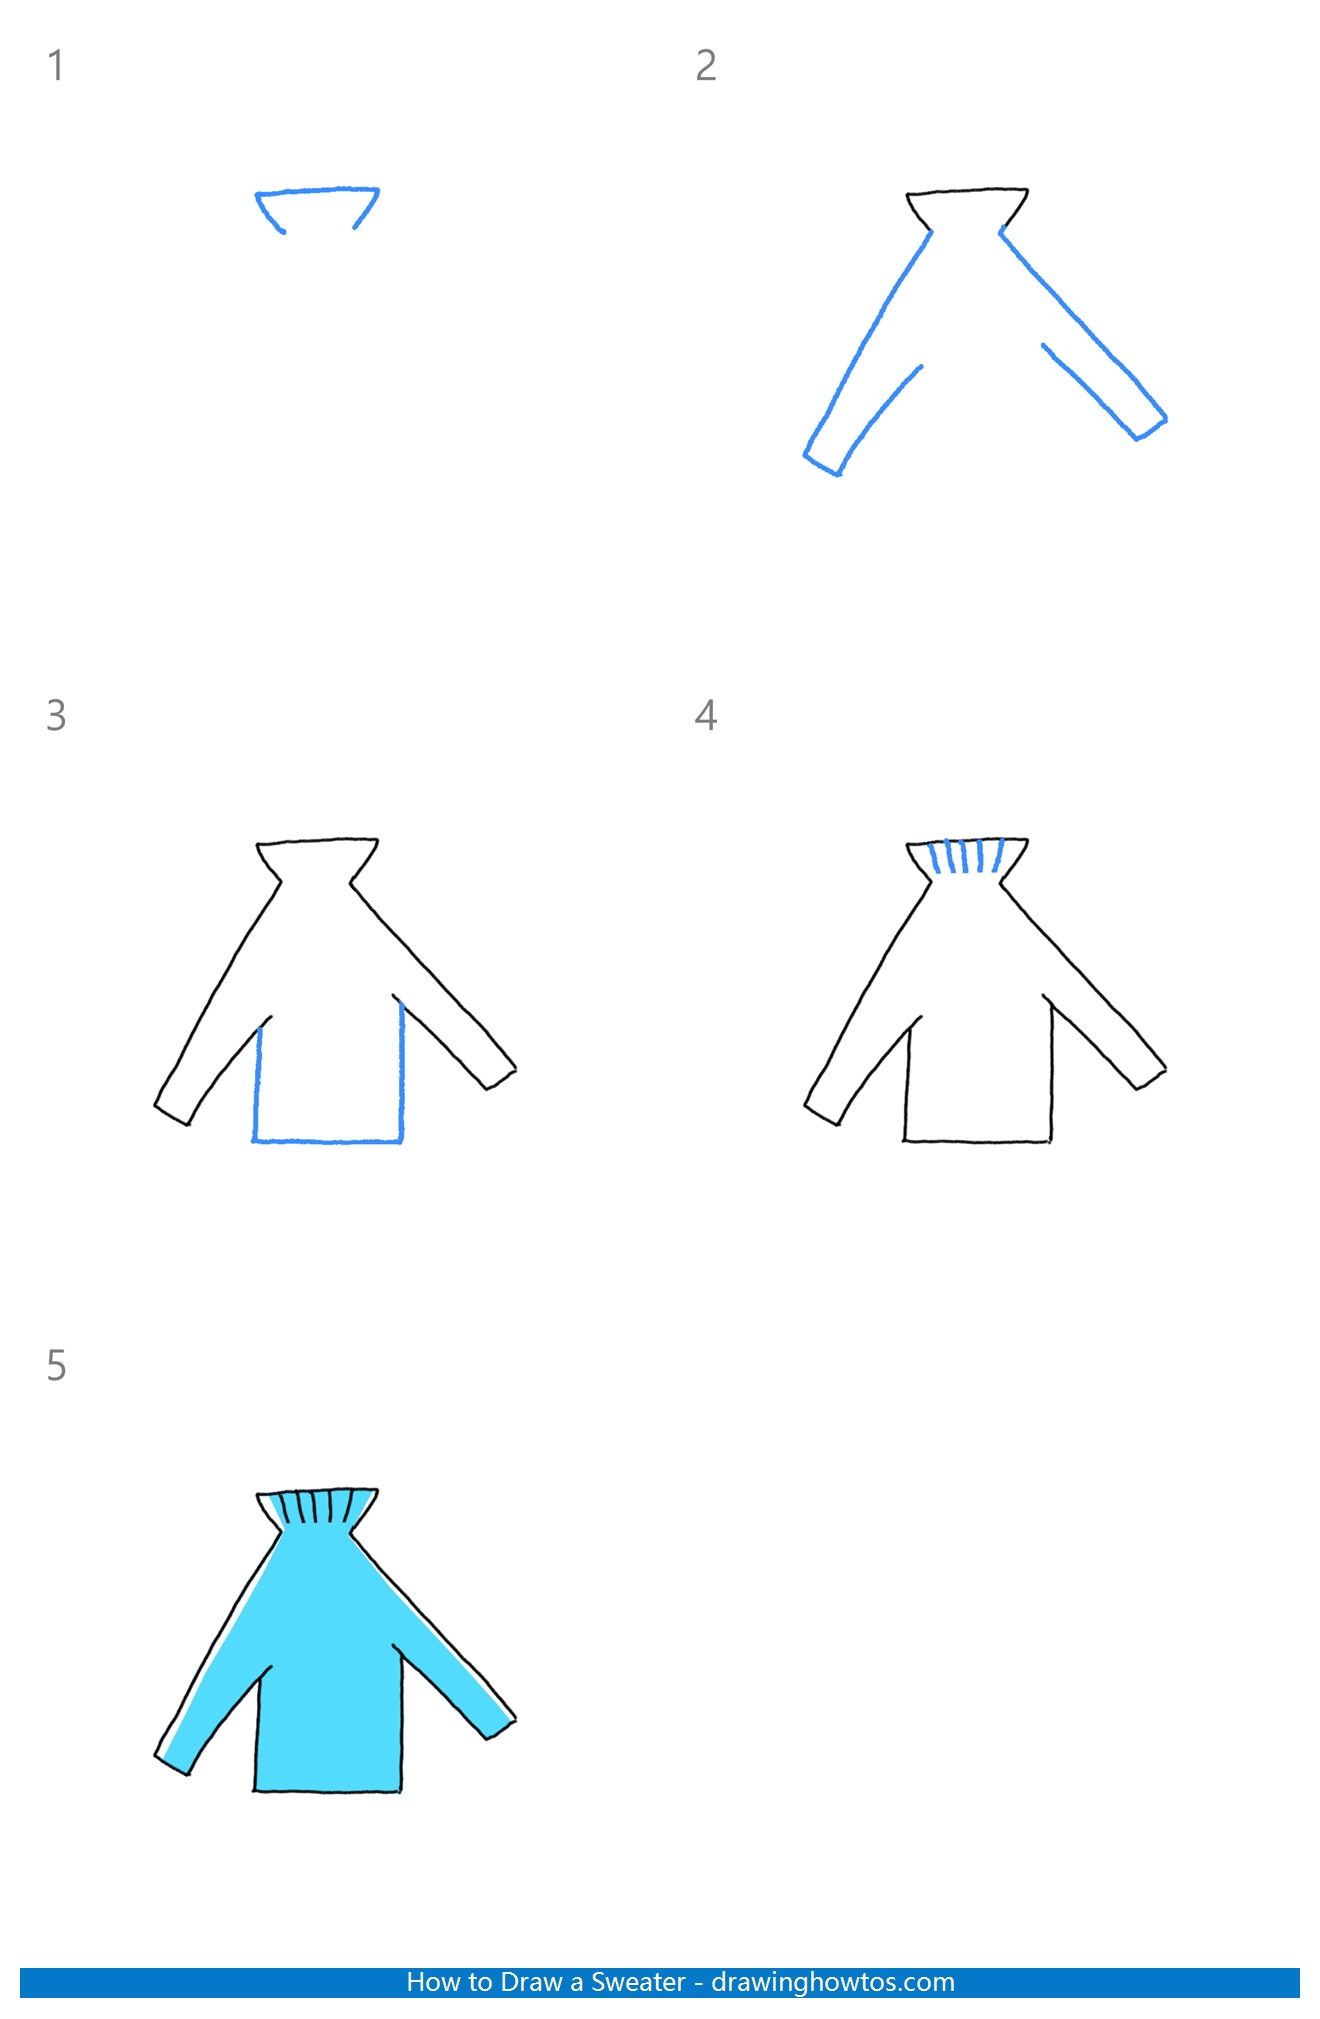 How to Draw a Sweater Step by Step